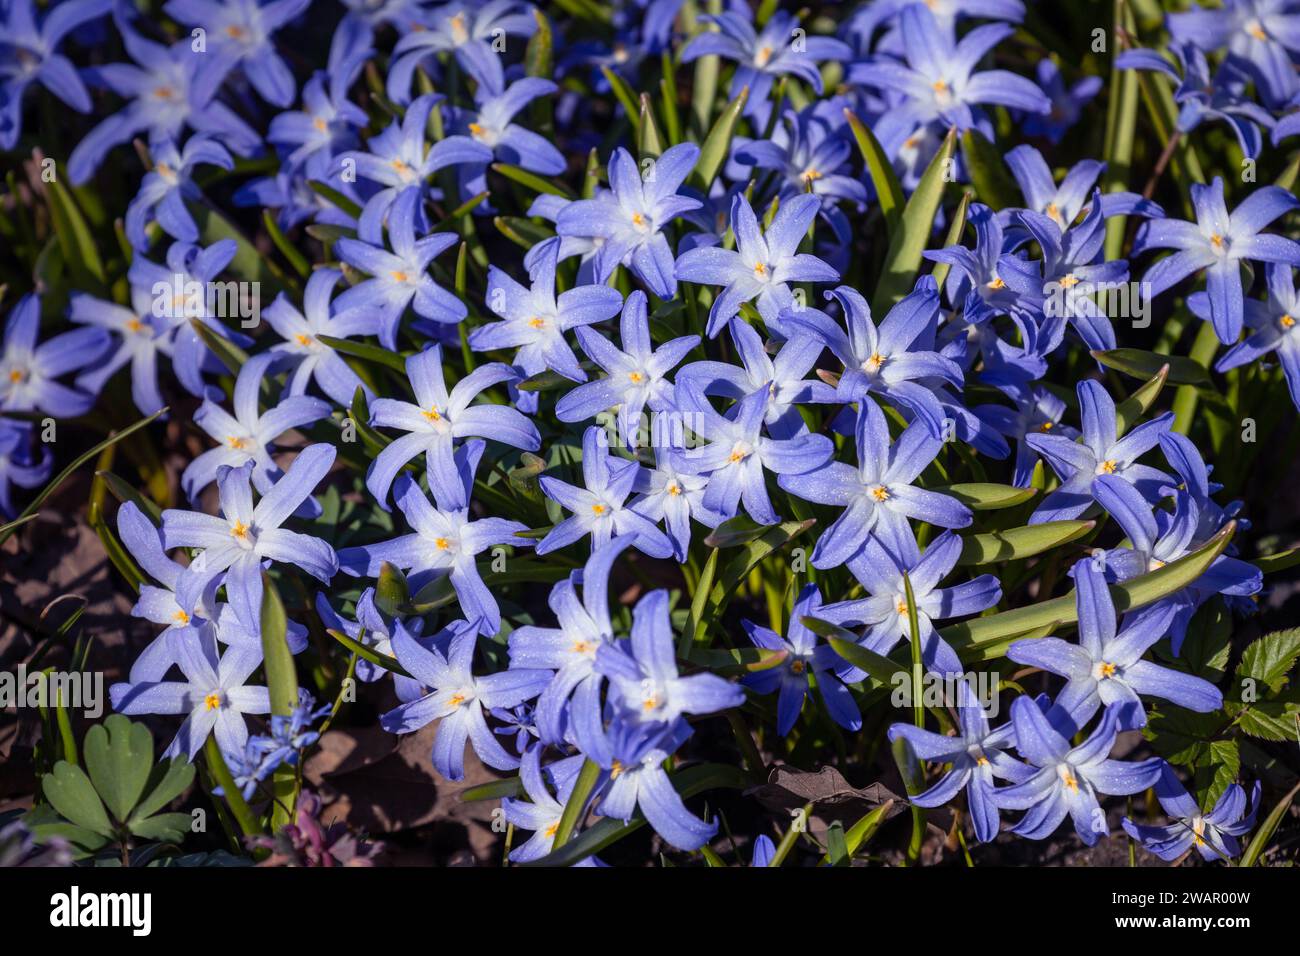 Early spring flowers of Scilla luciliae or Chionodoxa. Floral natural background. Stock Photo